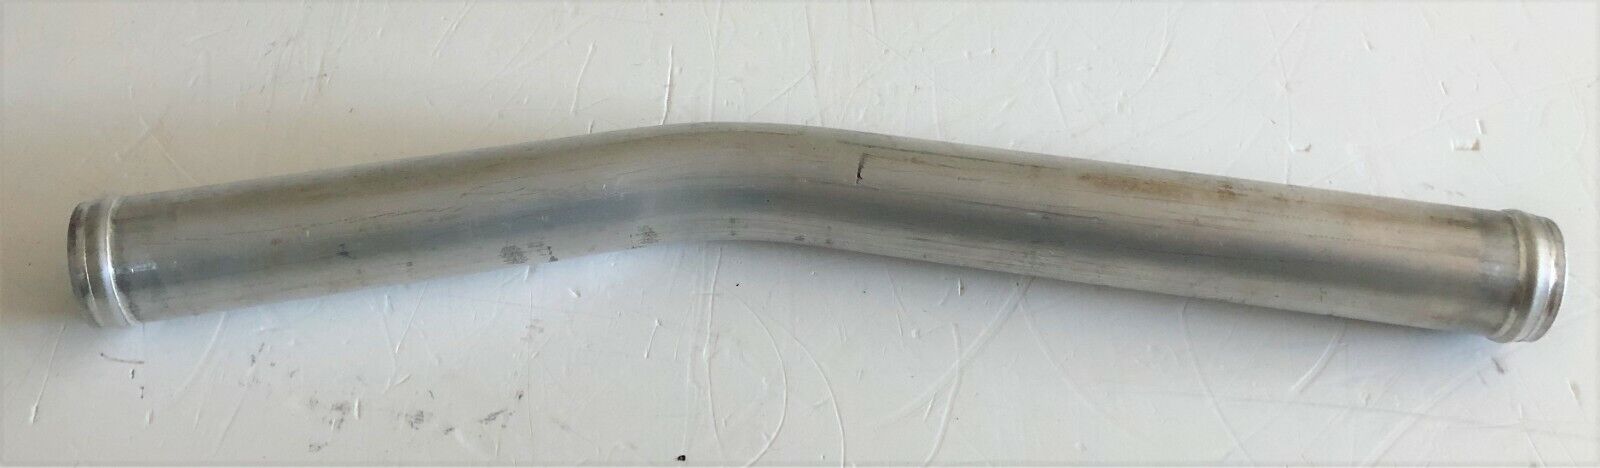 Lotus Esprit S3 Turbo Alloy Pipe, Header Tank Outlet A082K4177F